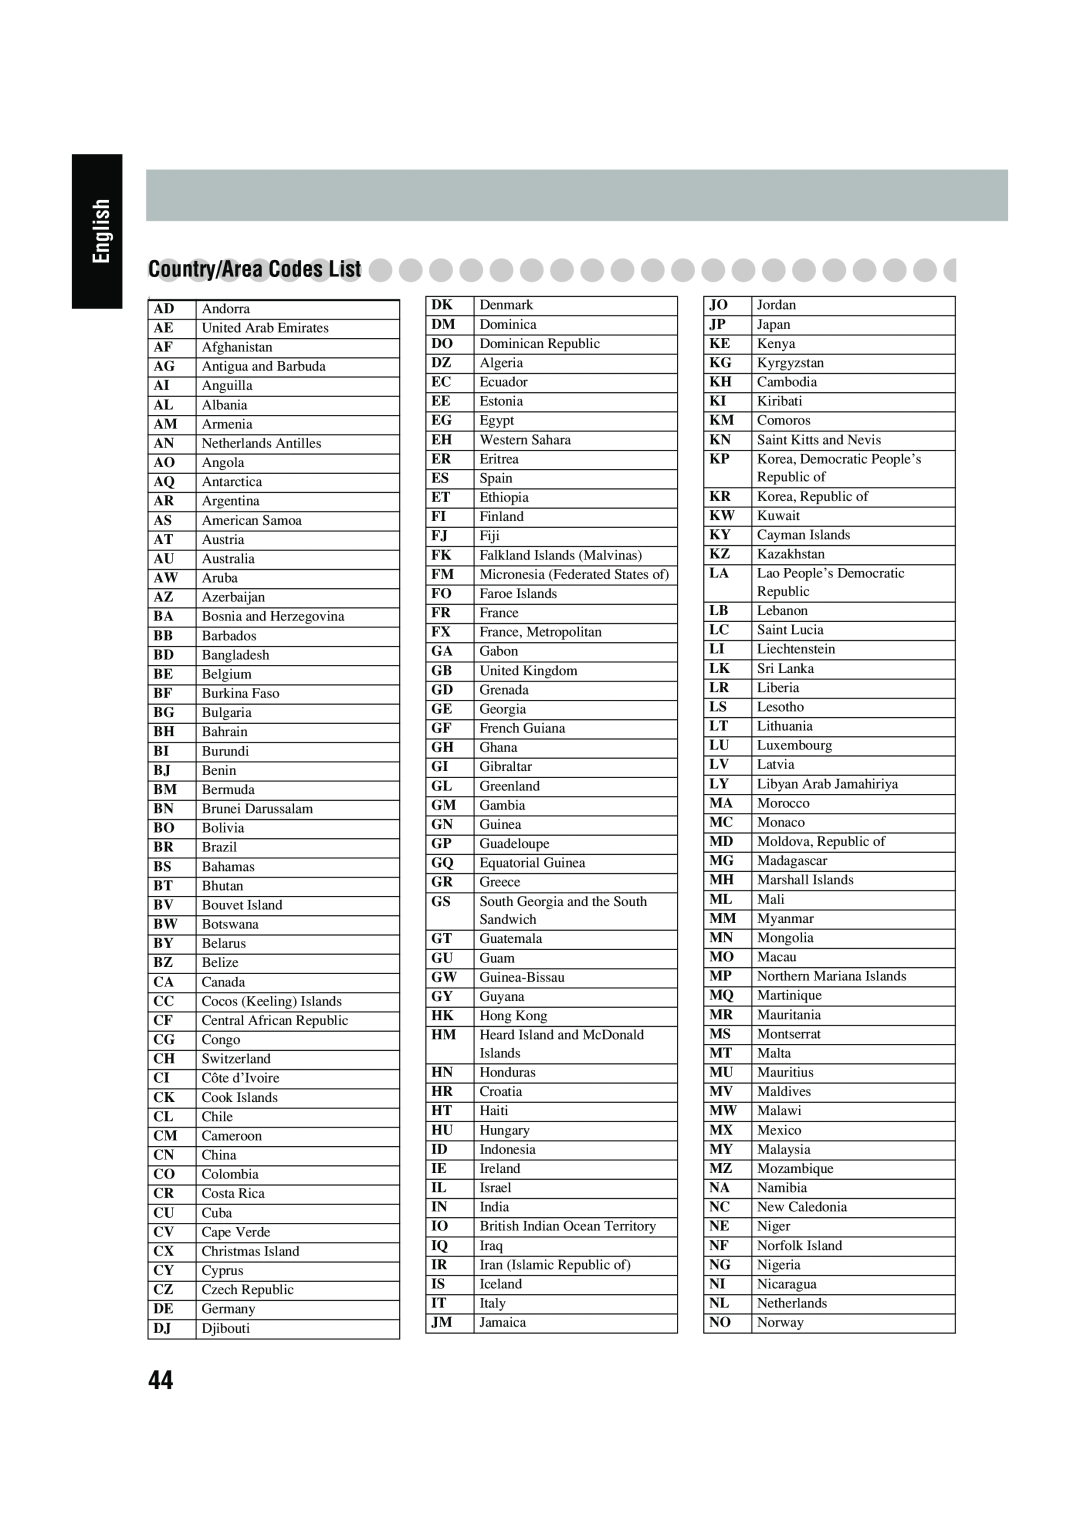 JVC UX-P450 manual Country/AreaCodes List, English 